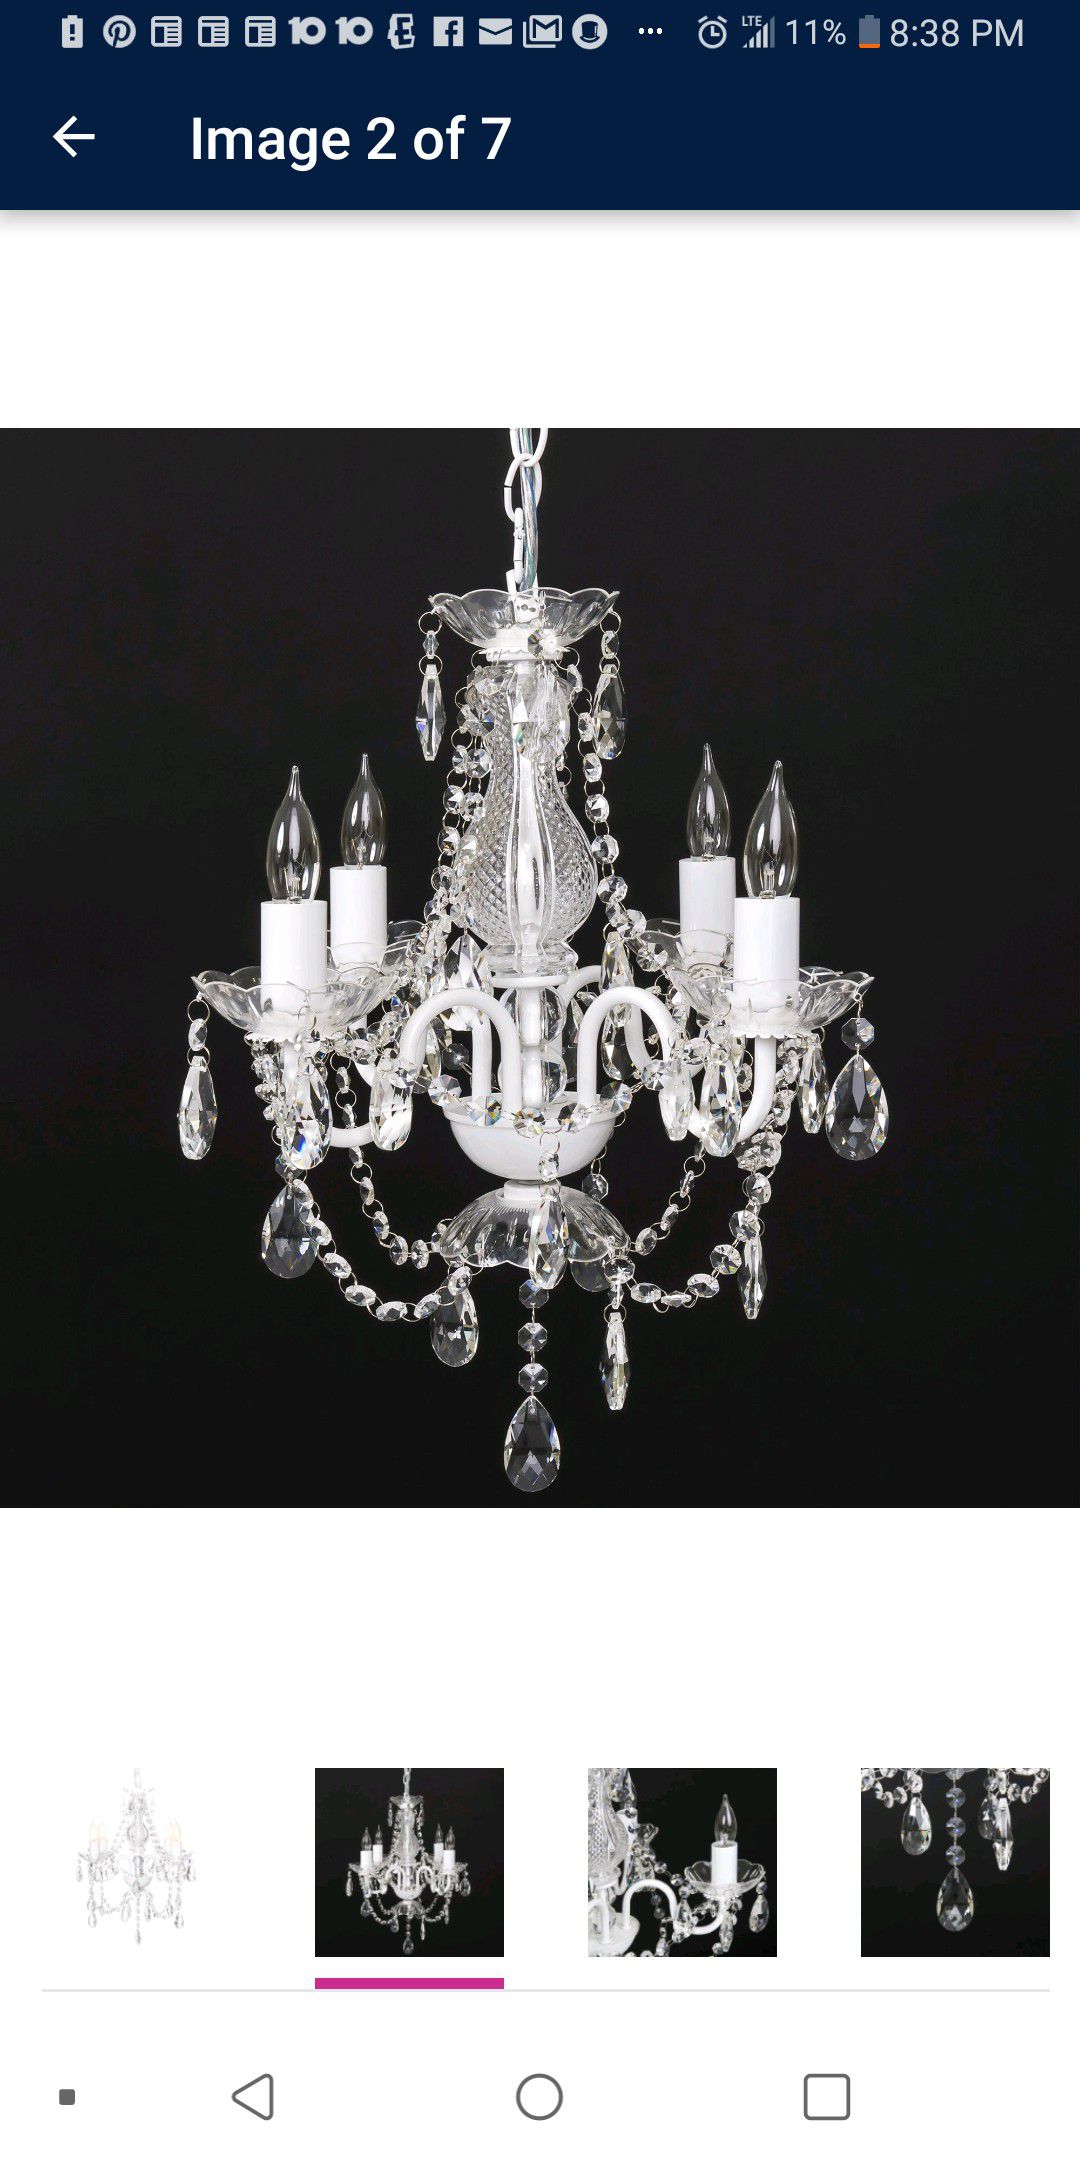 Brand New Elegant Acrylic Crystal Chandelier Ceiling Light Fixture for Dining Room, Bedroom, or Foyer in White